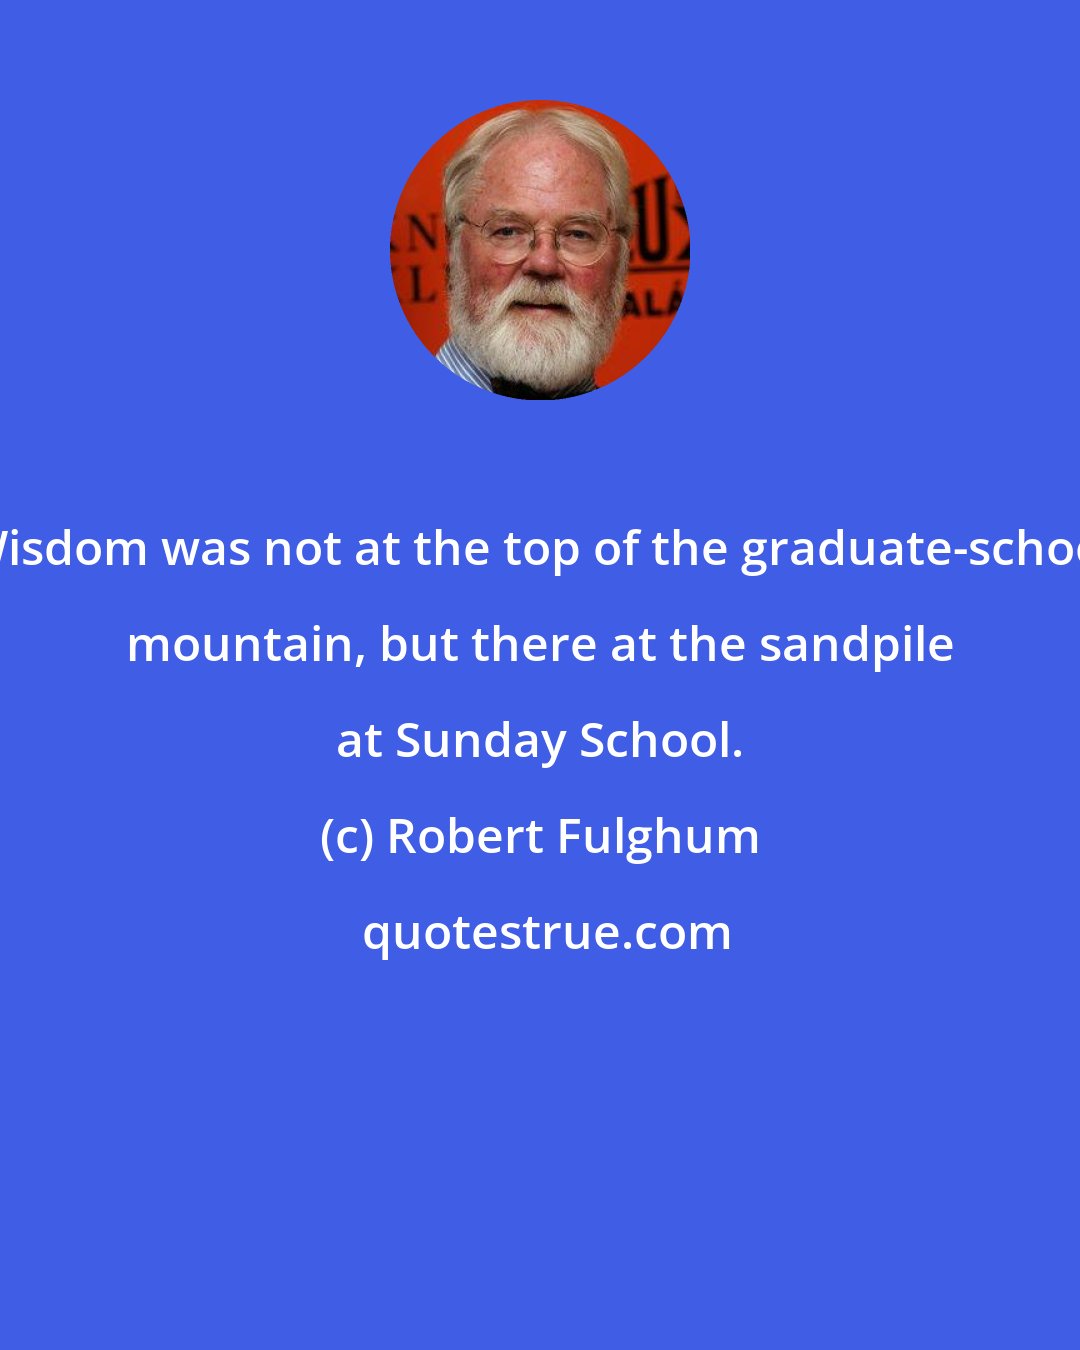 Robert Fulghum: Wisdom was not at the top of the graduate-school mountain, but there at the sandpile at Sunday School.